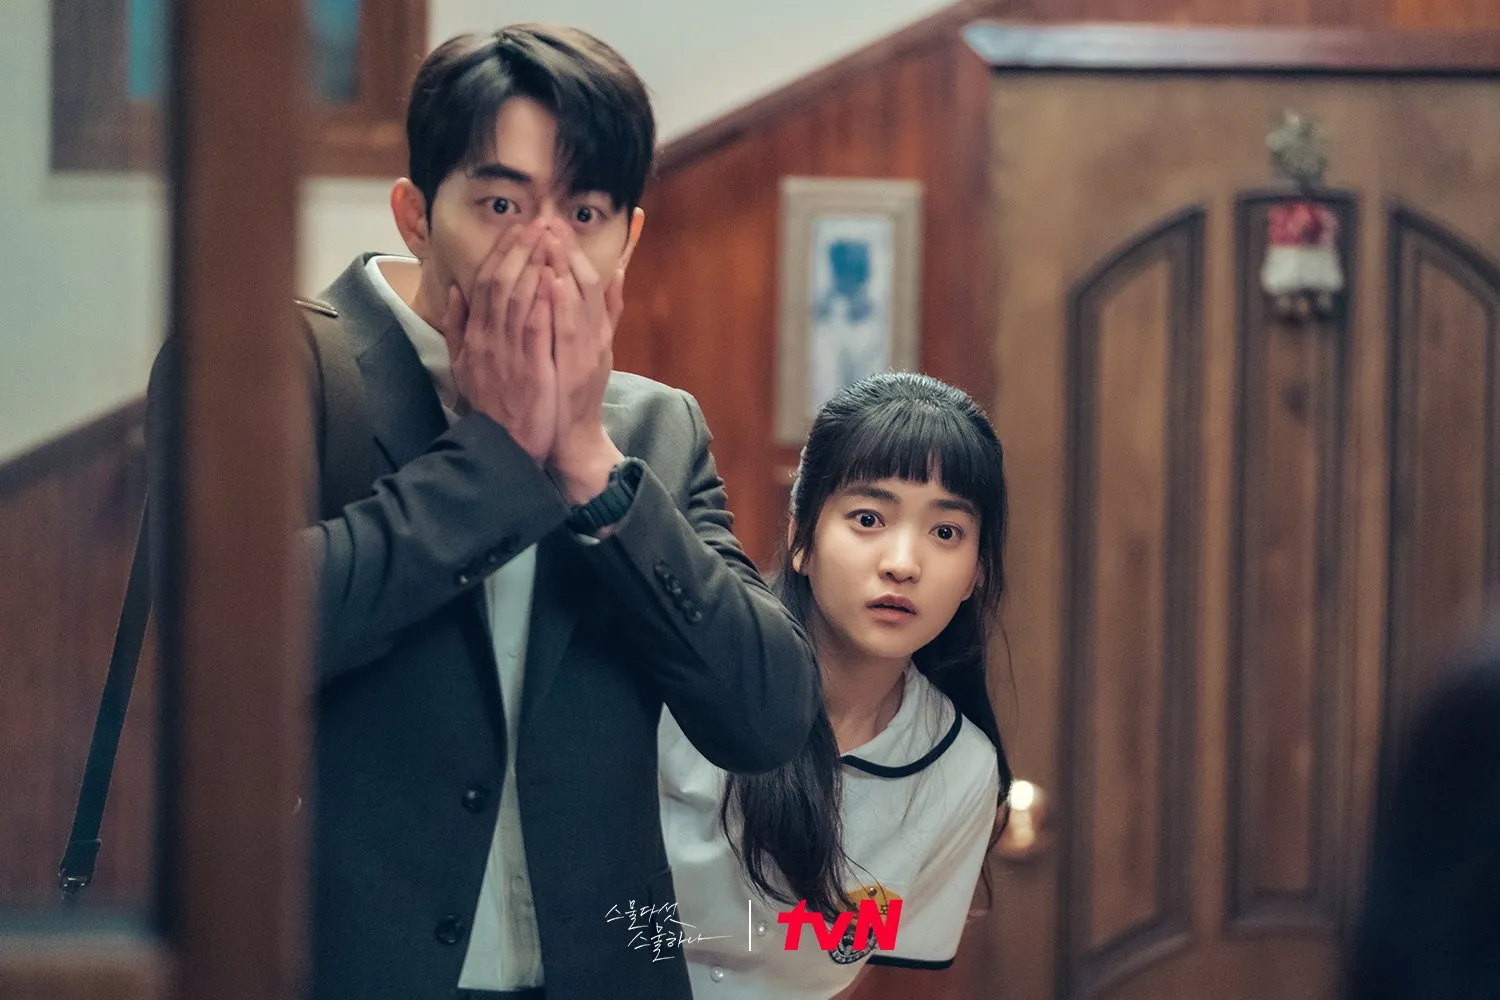 K-Drama “Twenty Five, Twenty One” Shares a sneak peek of Nam Joo Hyuk and Kim Tae Ri’s heart-fluttering chemistry which gets interrupted because of this unexpected person in an upcoming episode.